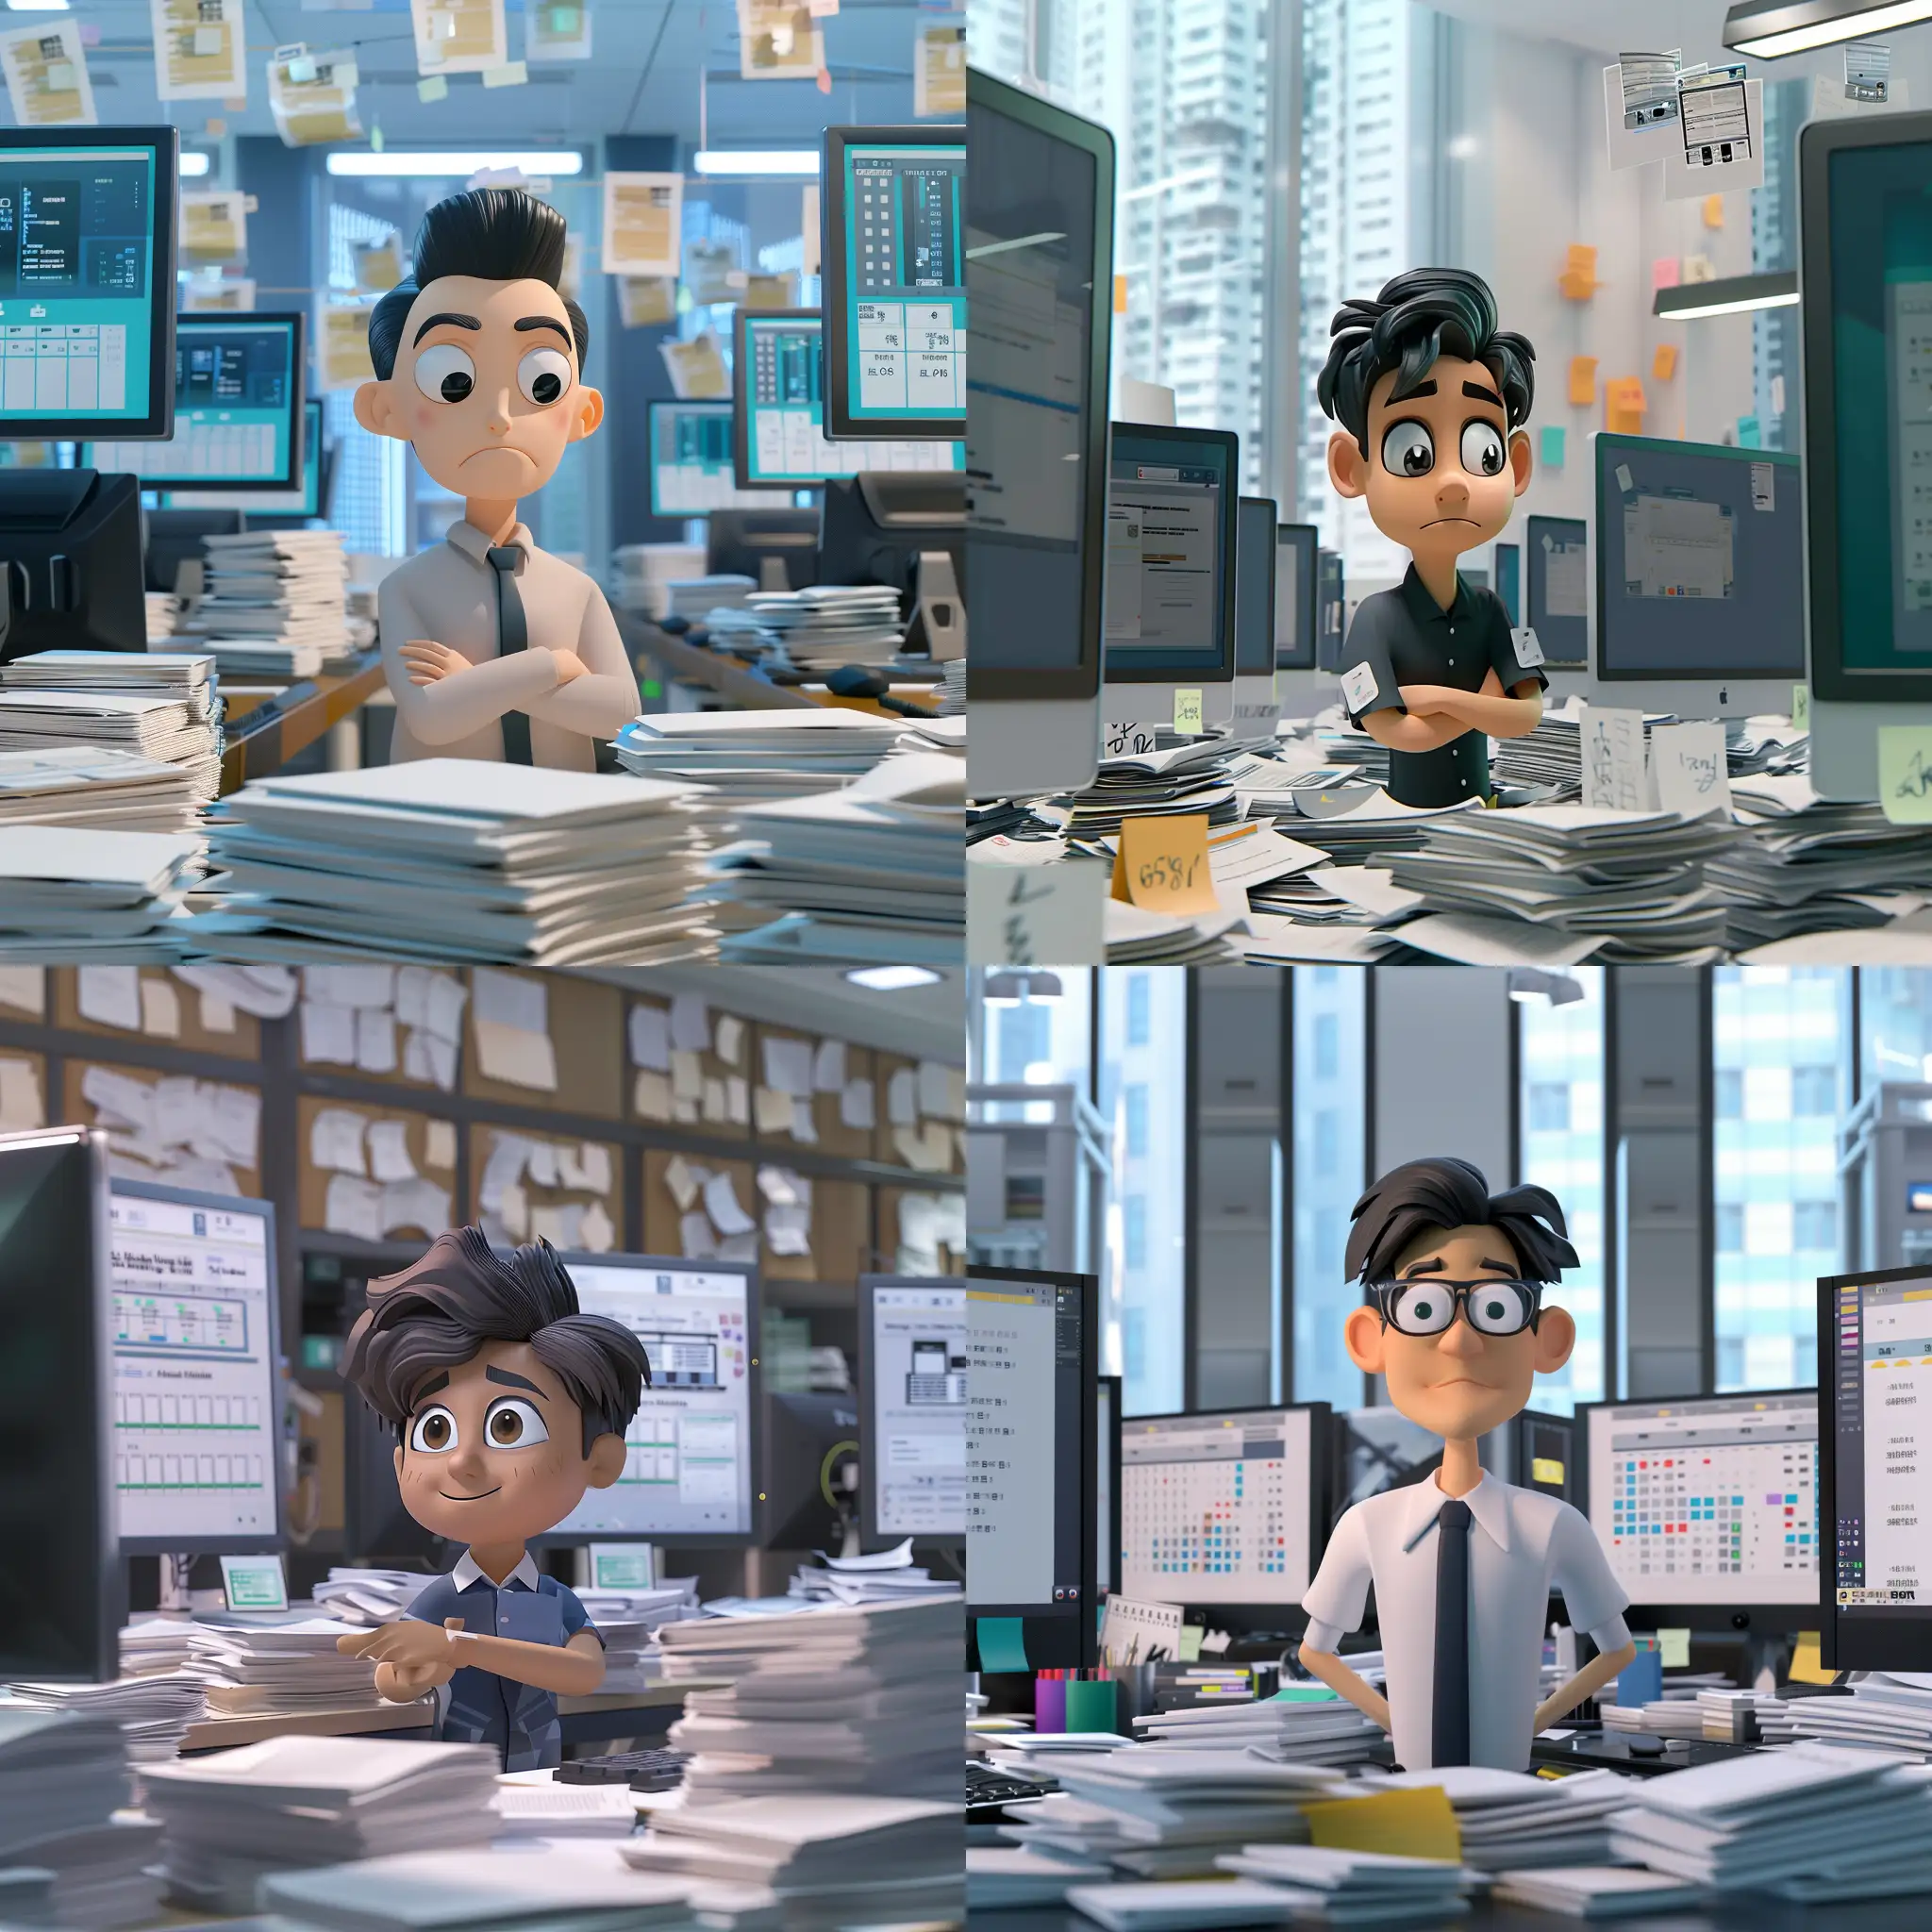 Create a 3D animated character of a plagiarism checker, deeply focused on screening content in a quiet editorial office in Hong Kong. The character should have an attentive and analytical expression, surrounded by large monitors displaying plagiarism checking software and piles of documents awaiting review. Embrace a color scheme enriched with shades around #2563eb to concur with the vigilant ambiance of authenticating originality.
